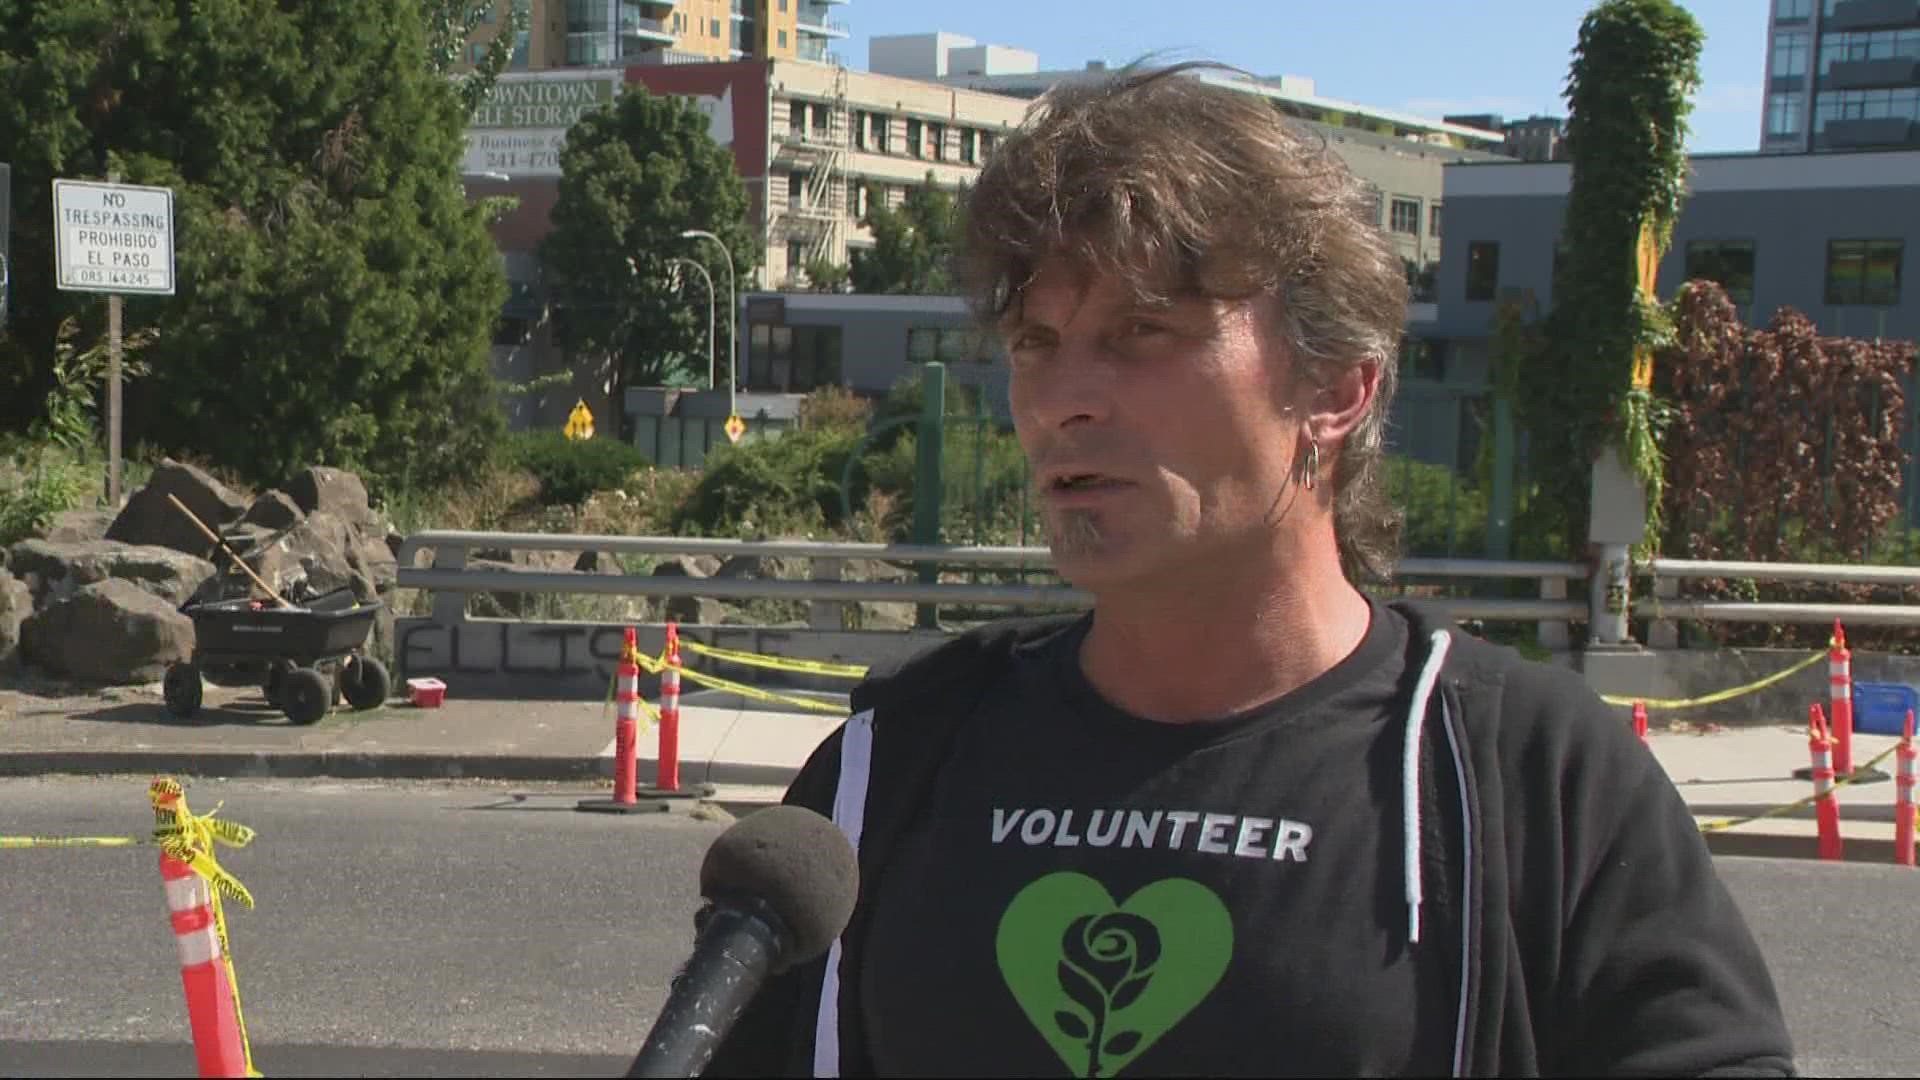 “We Heart Portland” was founded in Seattle to years ago and then came to Portland. Since then, volunteers have removed hundreds of tons of trash.